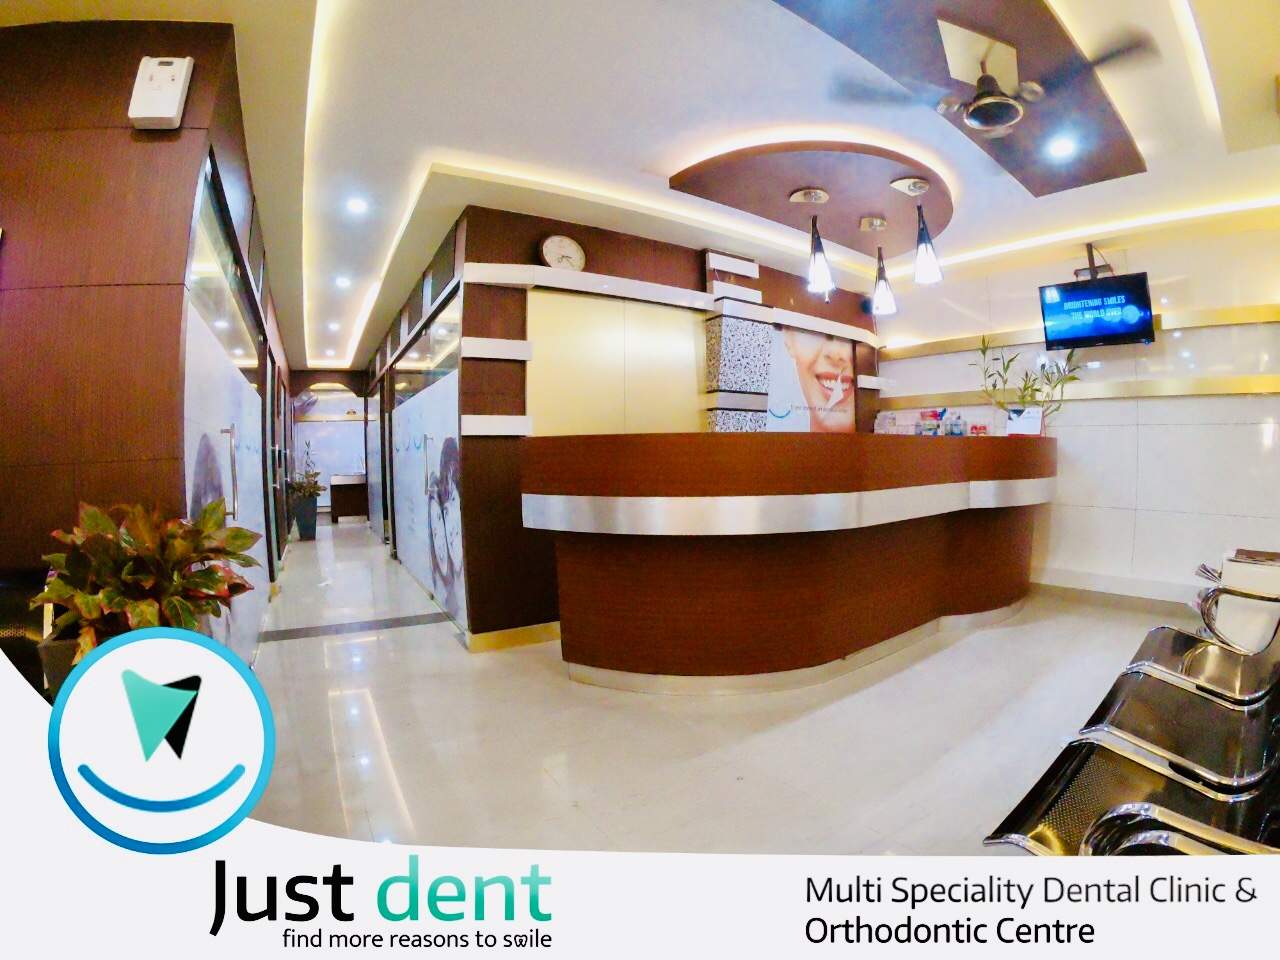 Justdent Multispeciality Dental Clinic and Orthodo, DENTAL CLINIC,  service in Kayamkulam, Alappuzha